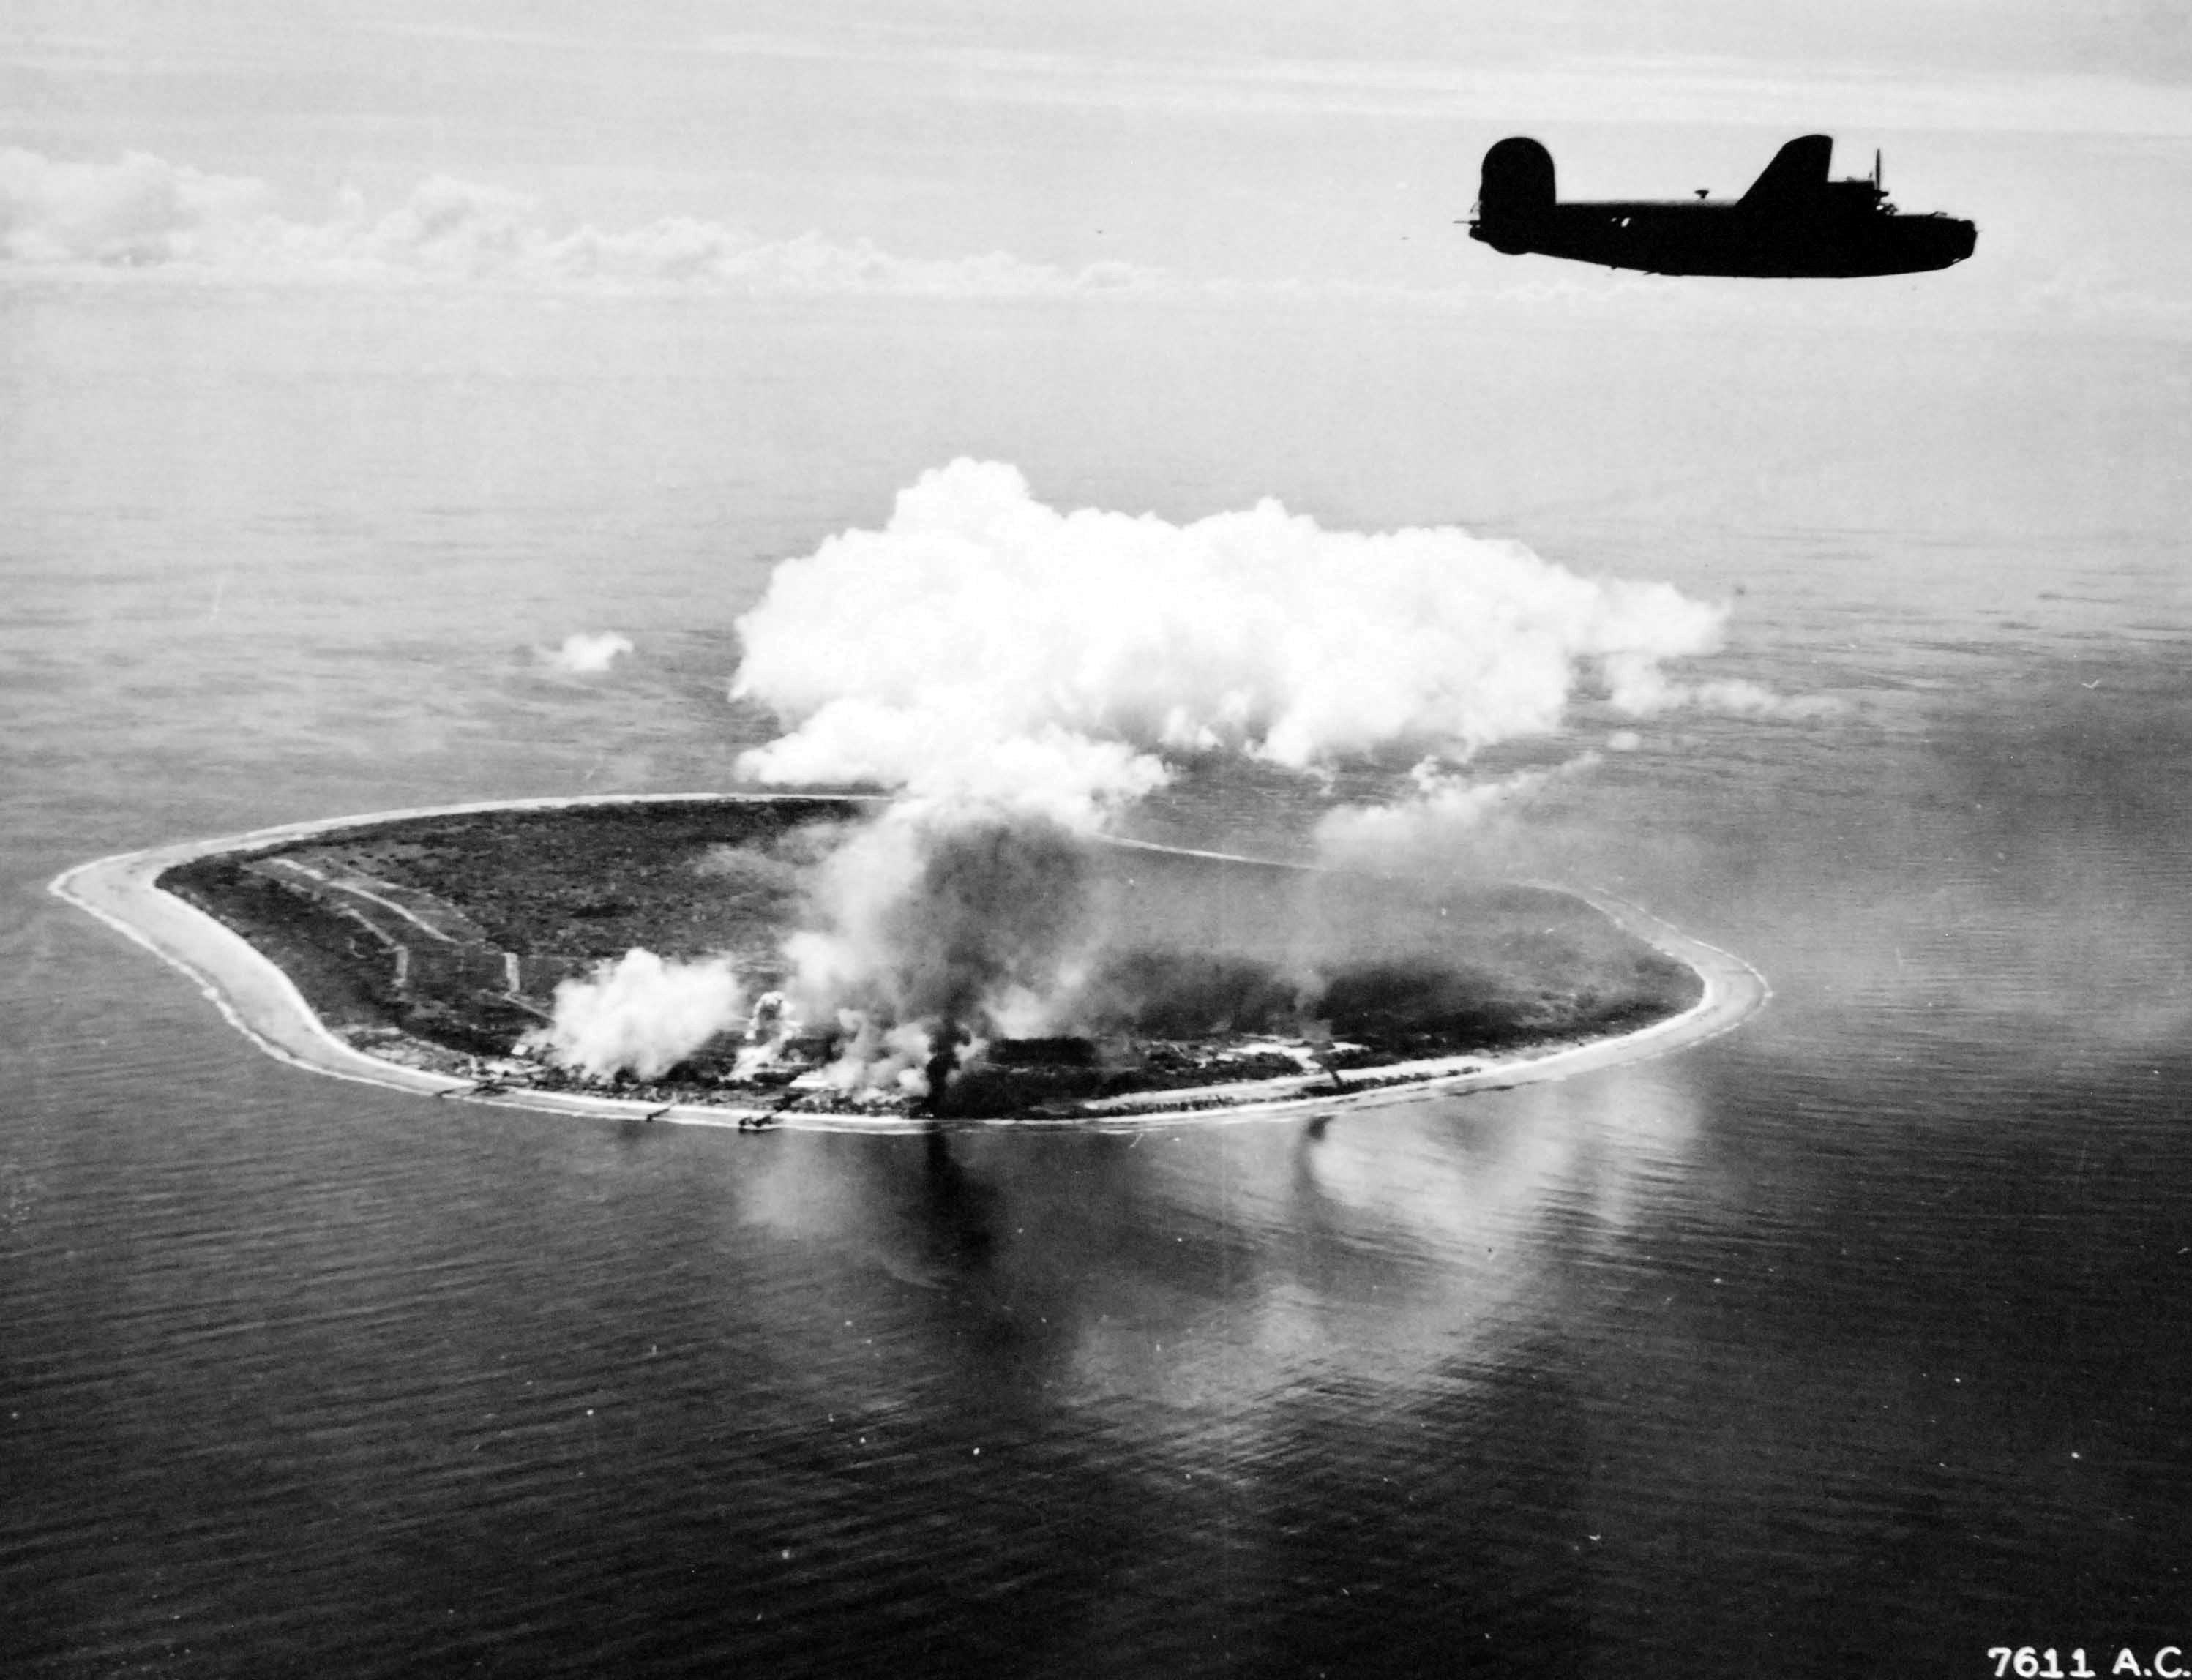 B-24 Liberator of the US 307th Bomb Group over the smoking airstrip on Nauru Island after being bombed, Apr 20, 1943.